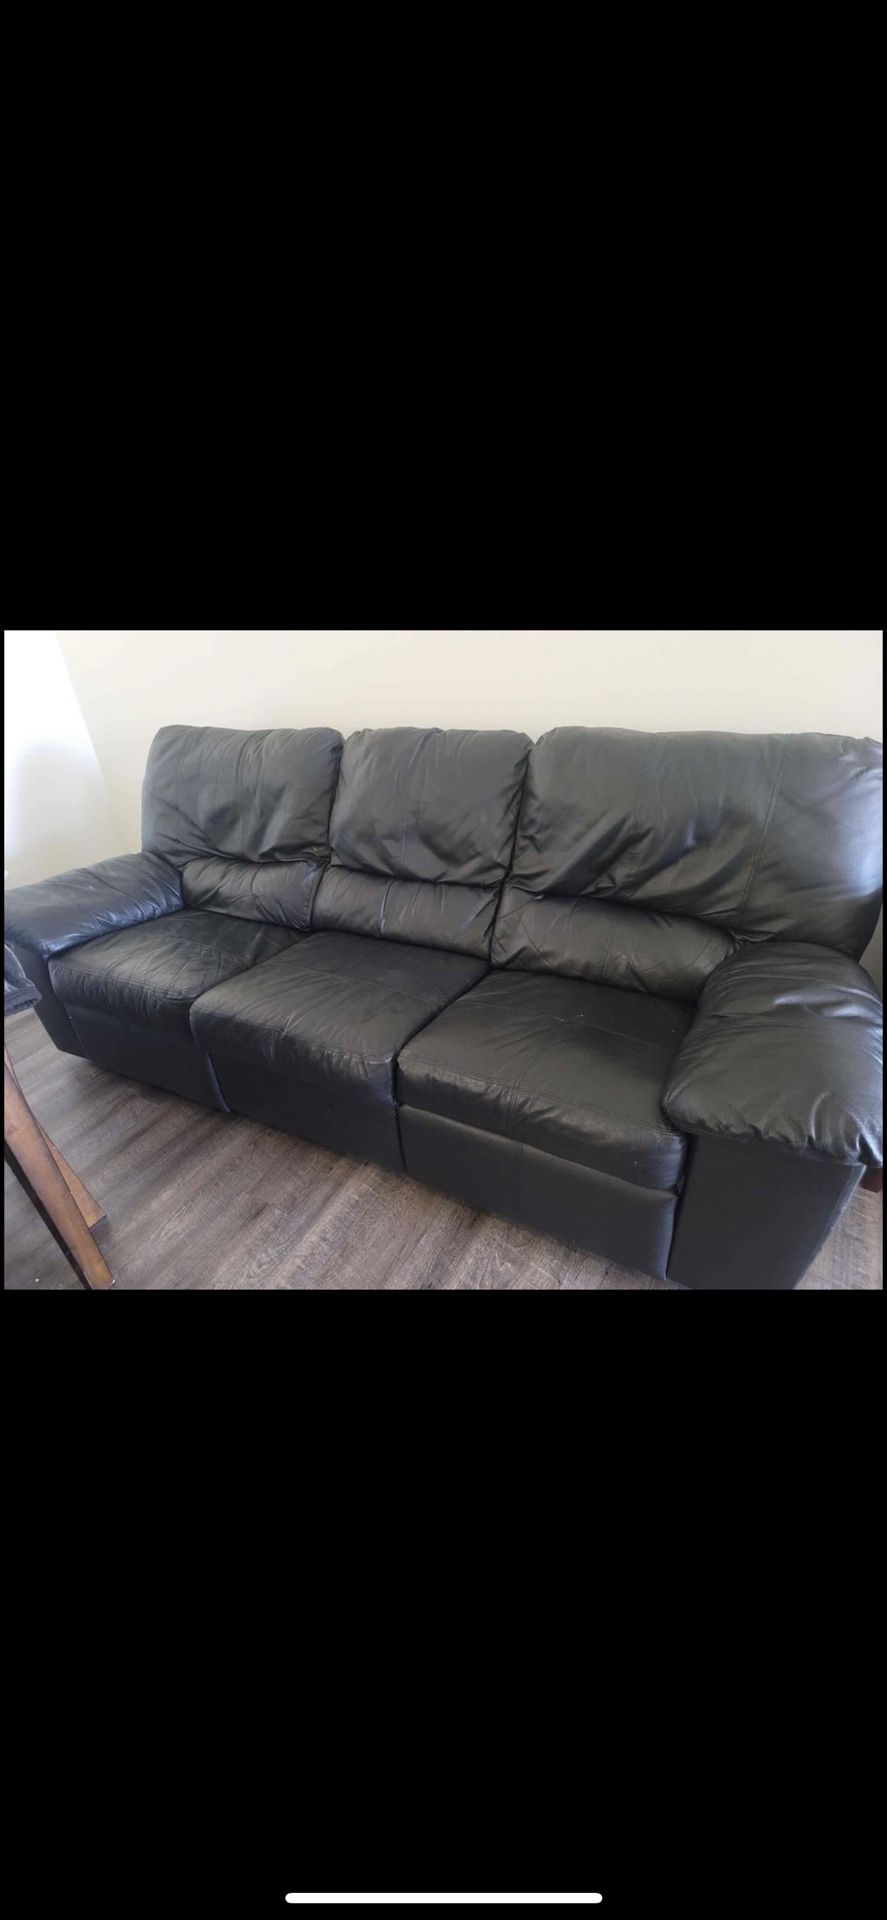 Reclining Couch- $600